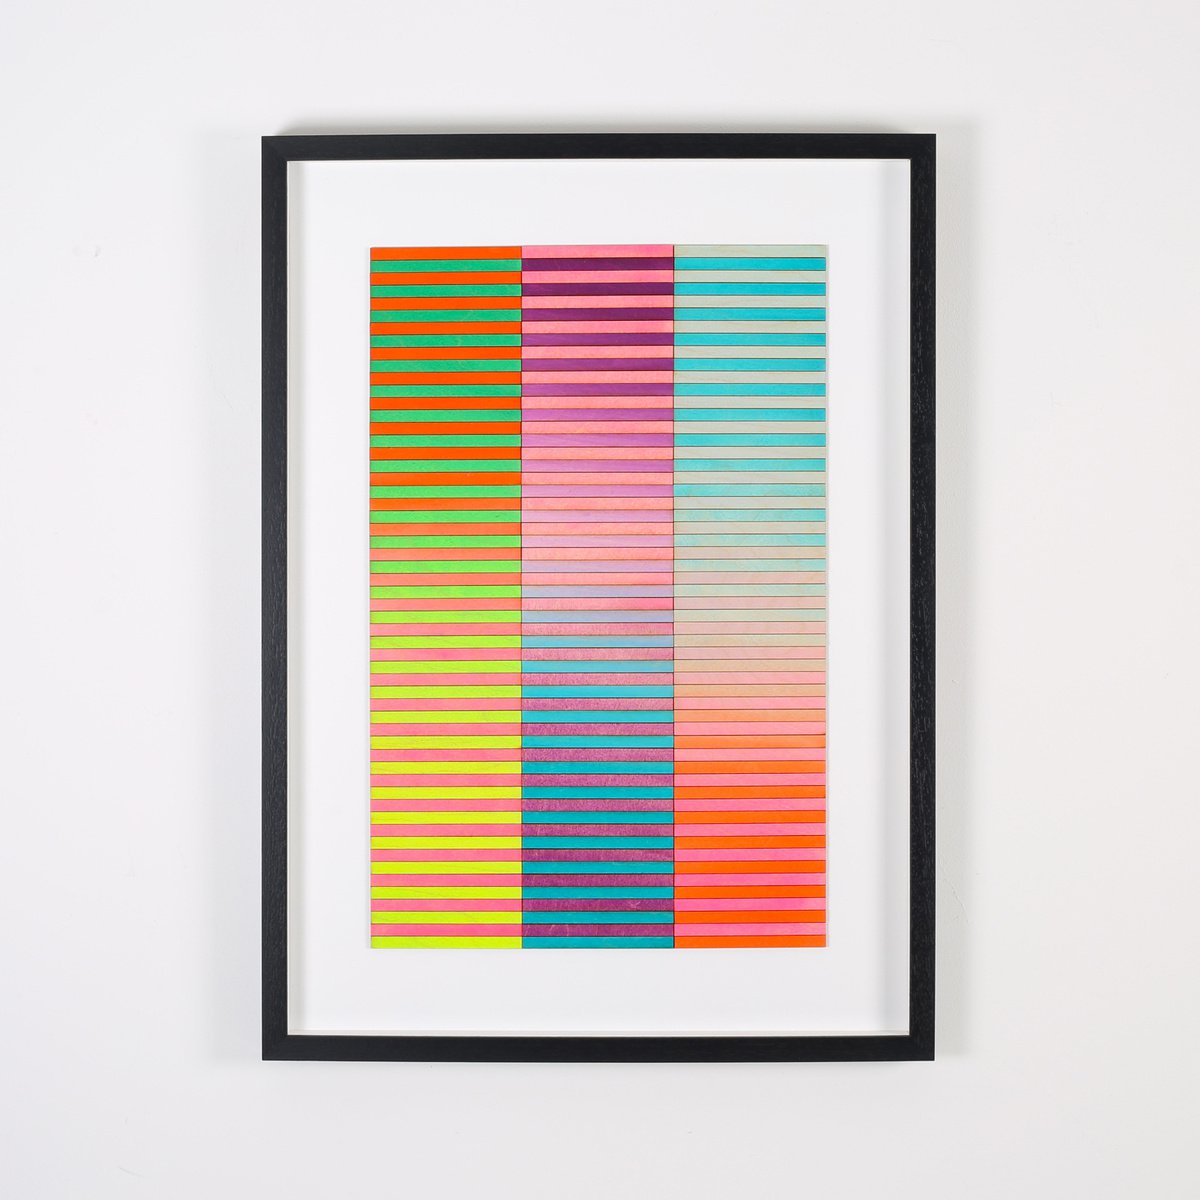 Three Panel Abstract Geometric Gradient Painting Number ONE by Amelia Coward